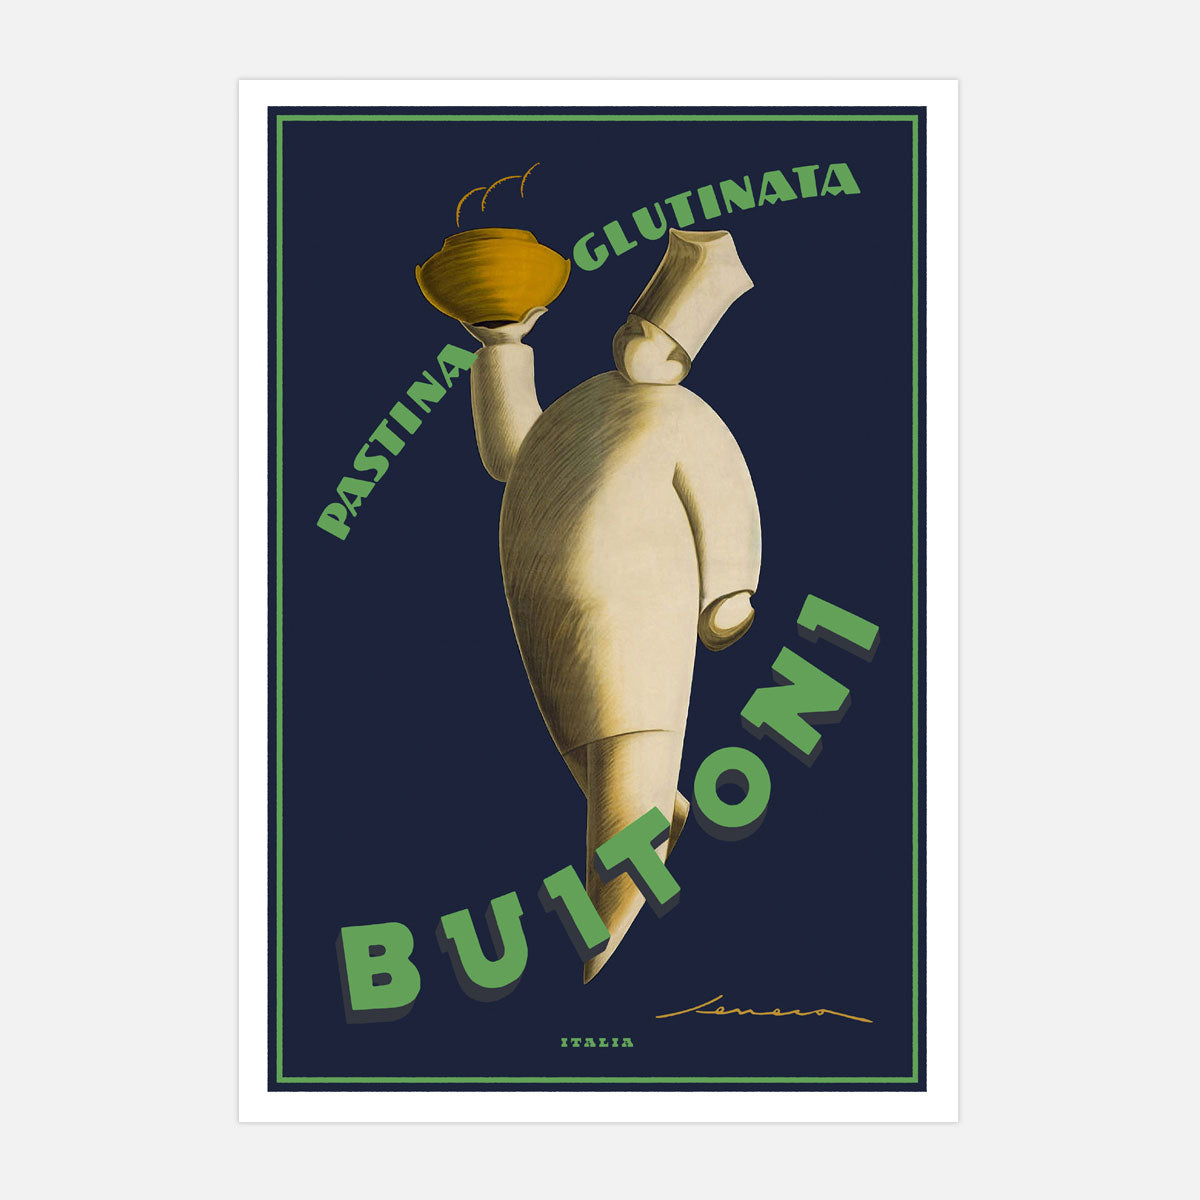 Buitoni Italy retro vintage advertising print from Places We Luv